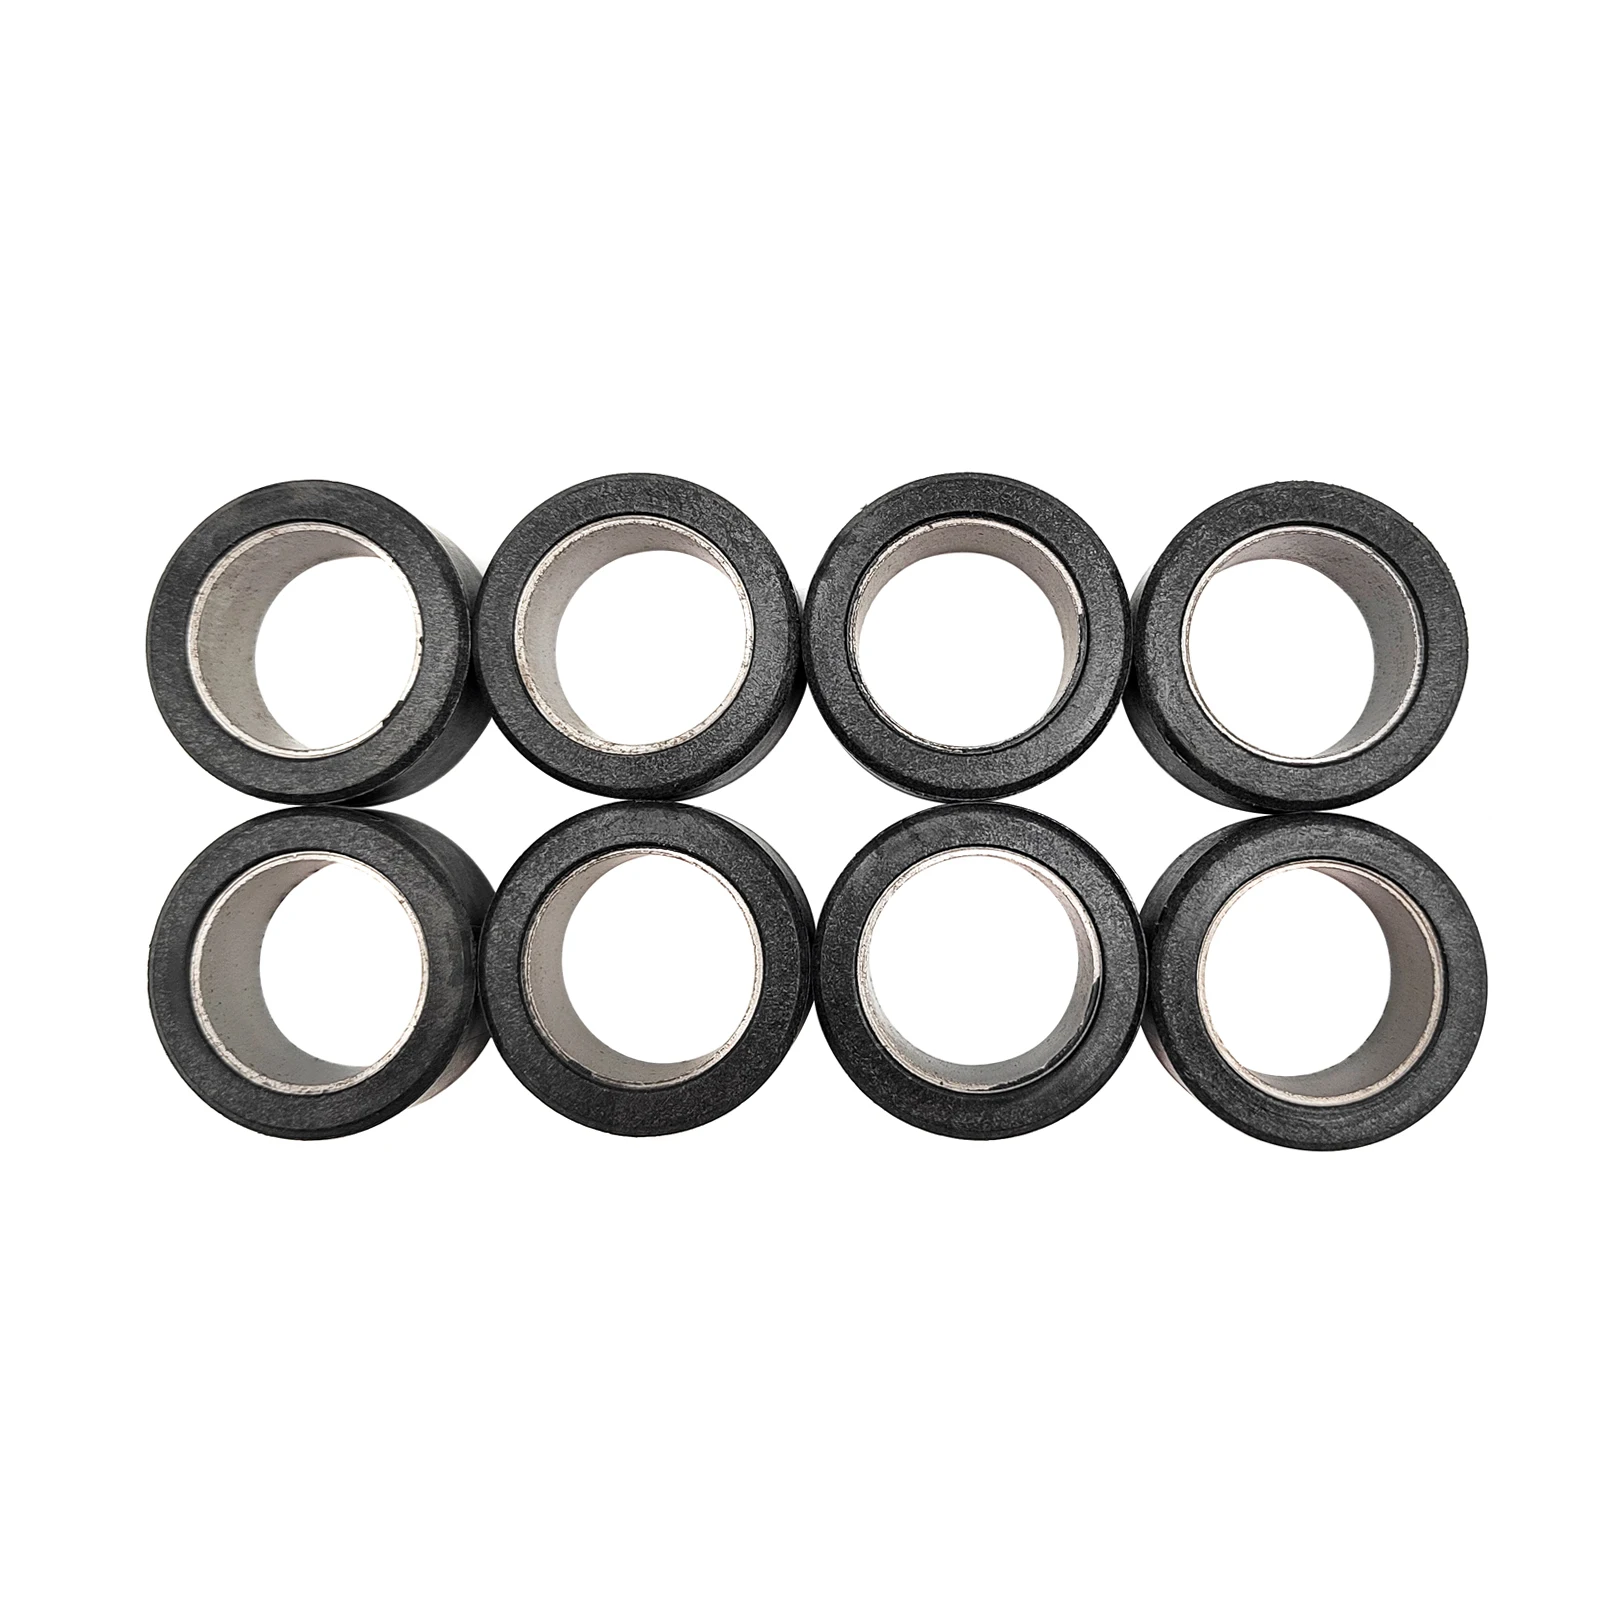 8PCS Variator Weight 30x15 ROLLER SET WEIGHT for Stels ATV UTV 500H 700H Hisun 500 700 Qlink 90700-F39-0000_5 21300-F39-0000 drive pulley primary clutch for stels 500h 700h hisun 500 700 x moto 400 500 700 yamaha grizzly 660 qlink 90700 f39 0000